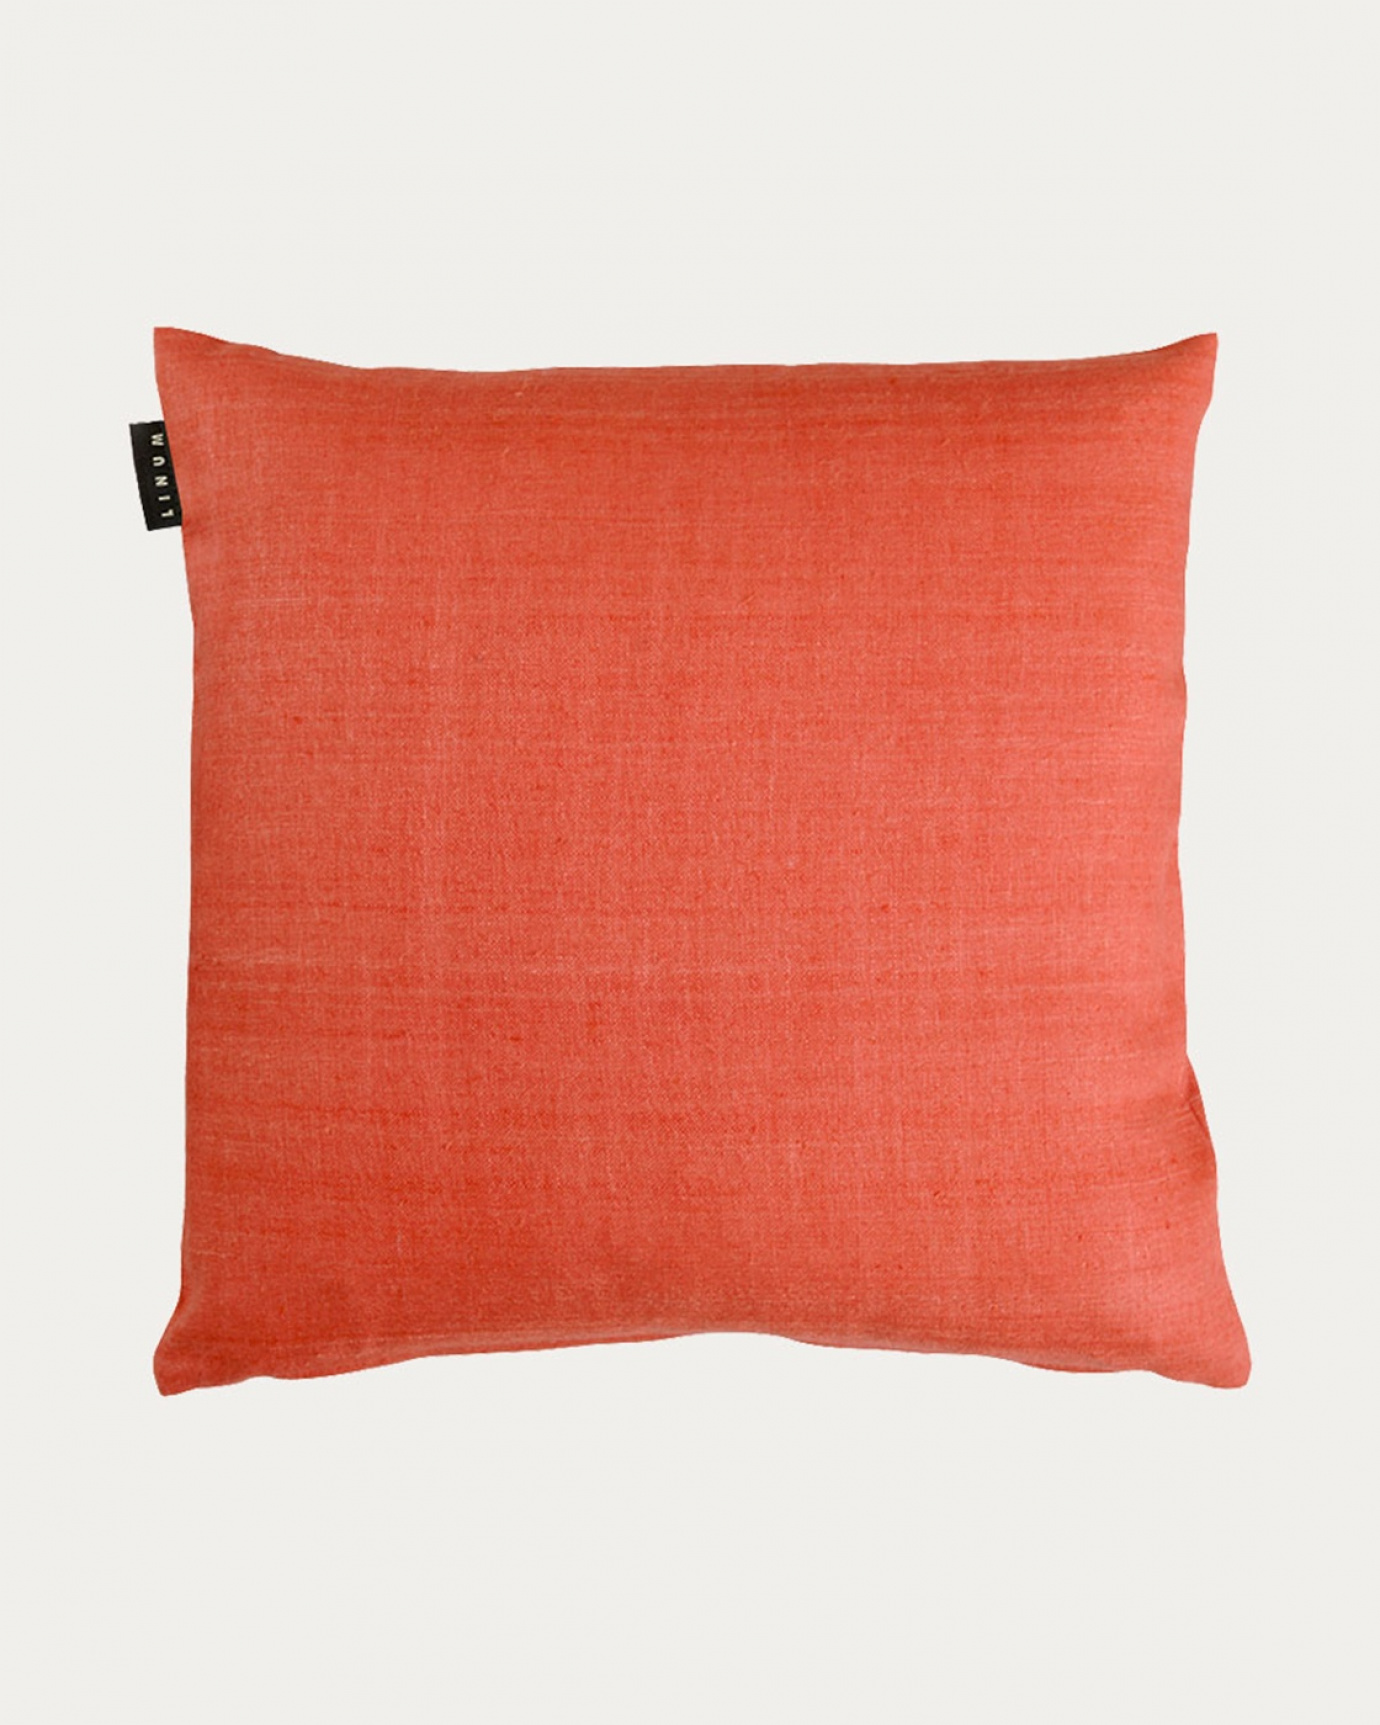 Product image deep coral red SETA cushion cover made of 100% raw silk that gives a nice lustre from LINUM DESIGN. Size 50x50 cm.